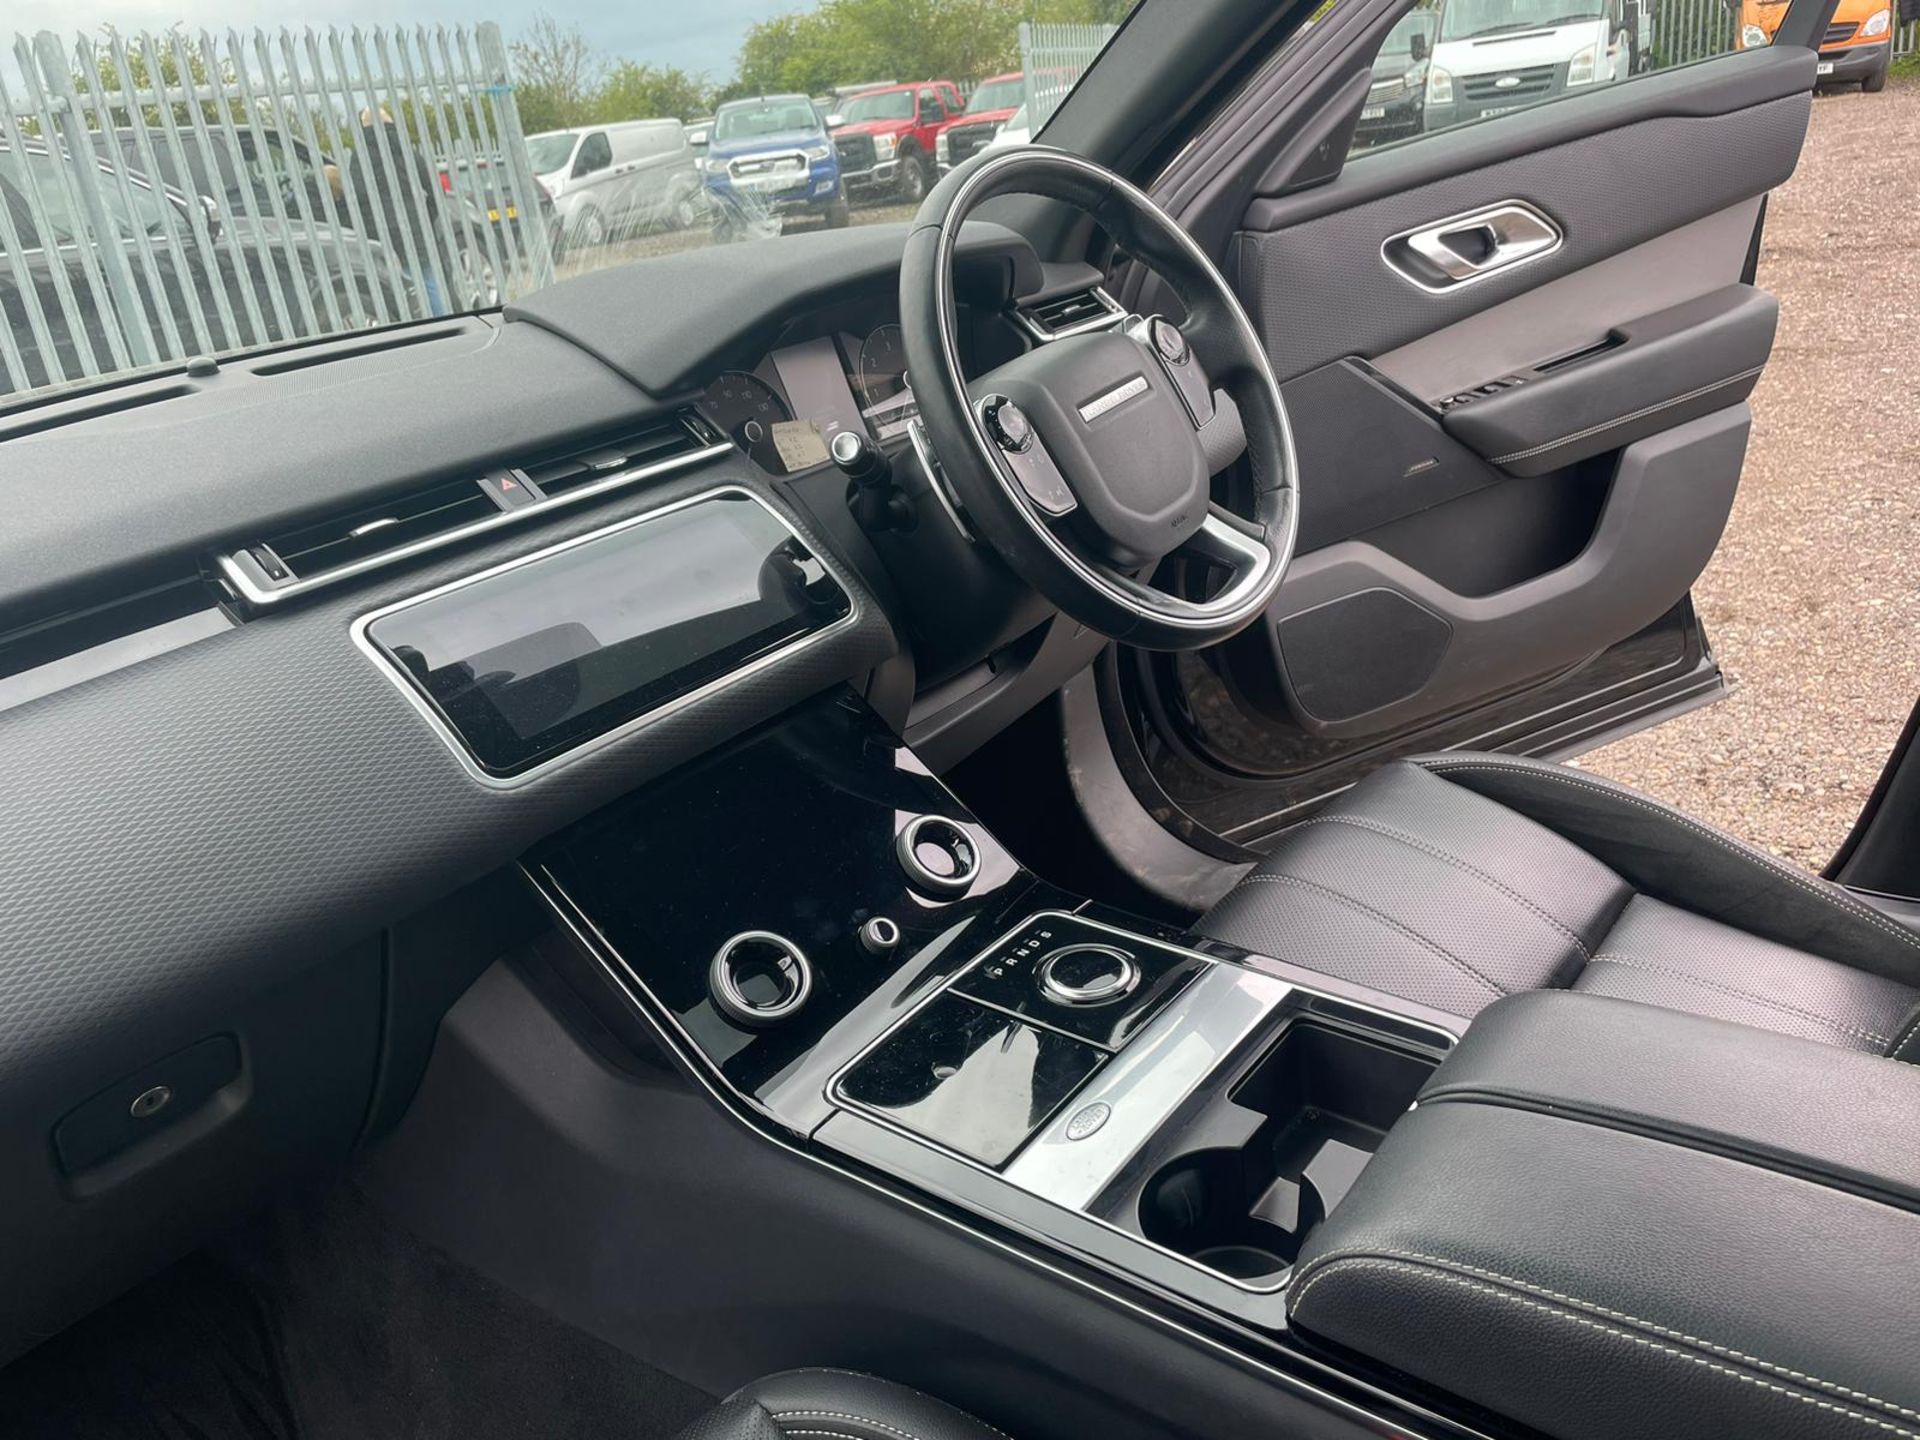 Land Rover Range Rover Velar 2.0 D240 R-Dynamic S 2018 '18 Reg' 4WD - Panoramic Roof- ULEZ Compliant - Image 24 of 33